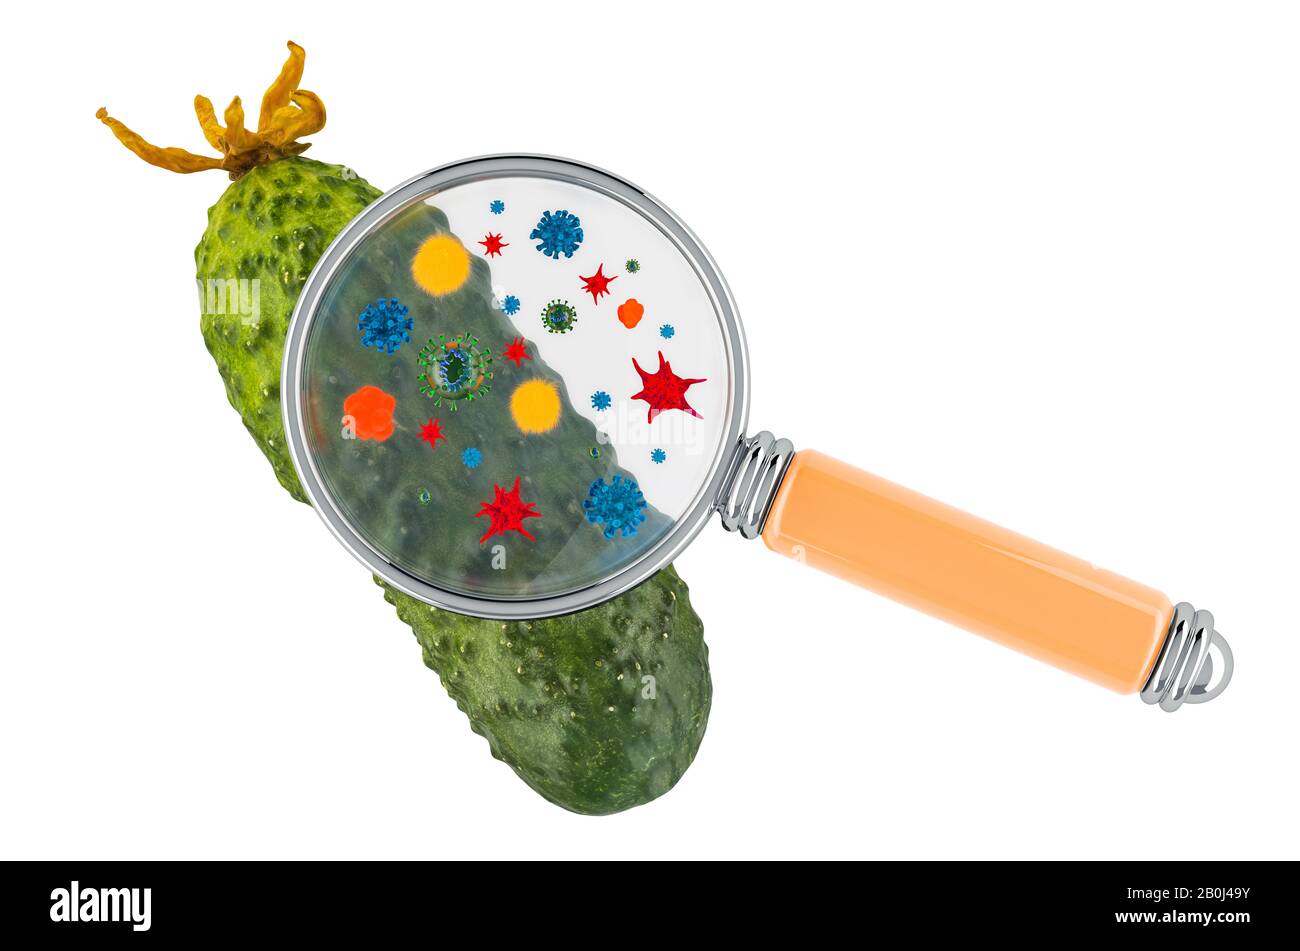 Cucumber with germs, microbes or viruses under magnifying glass, 3D rendering isolated on white background Stock Photo